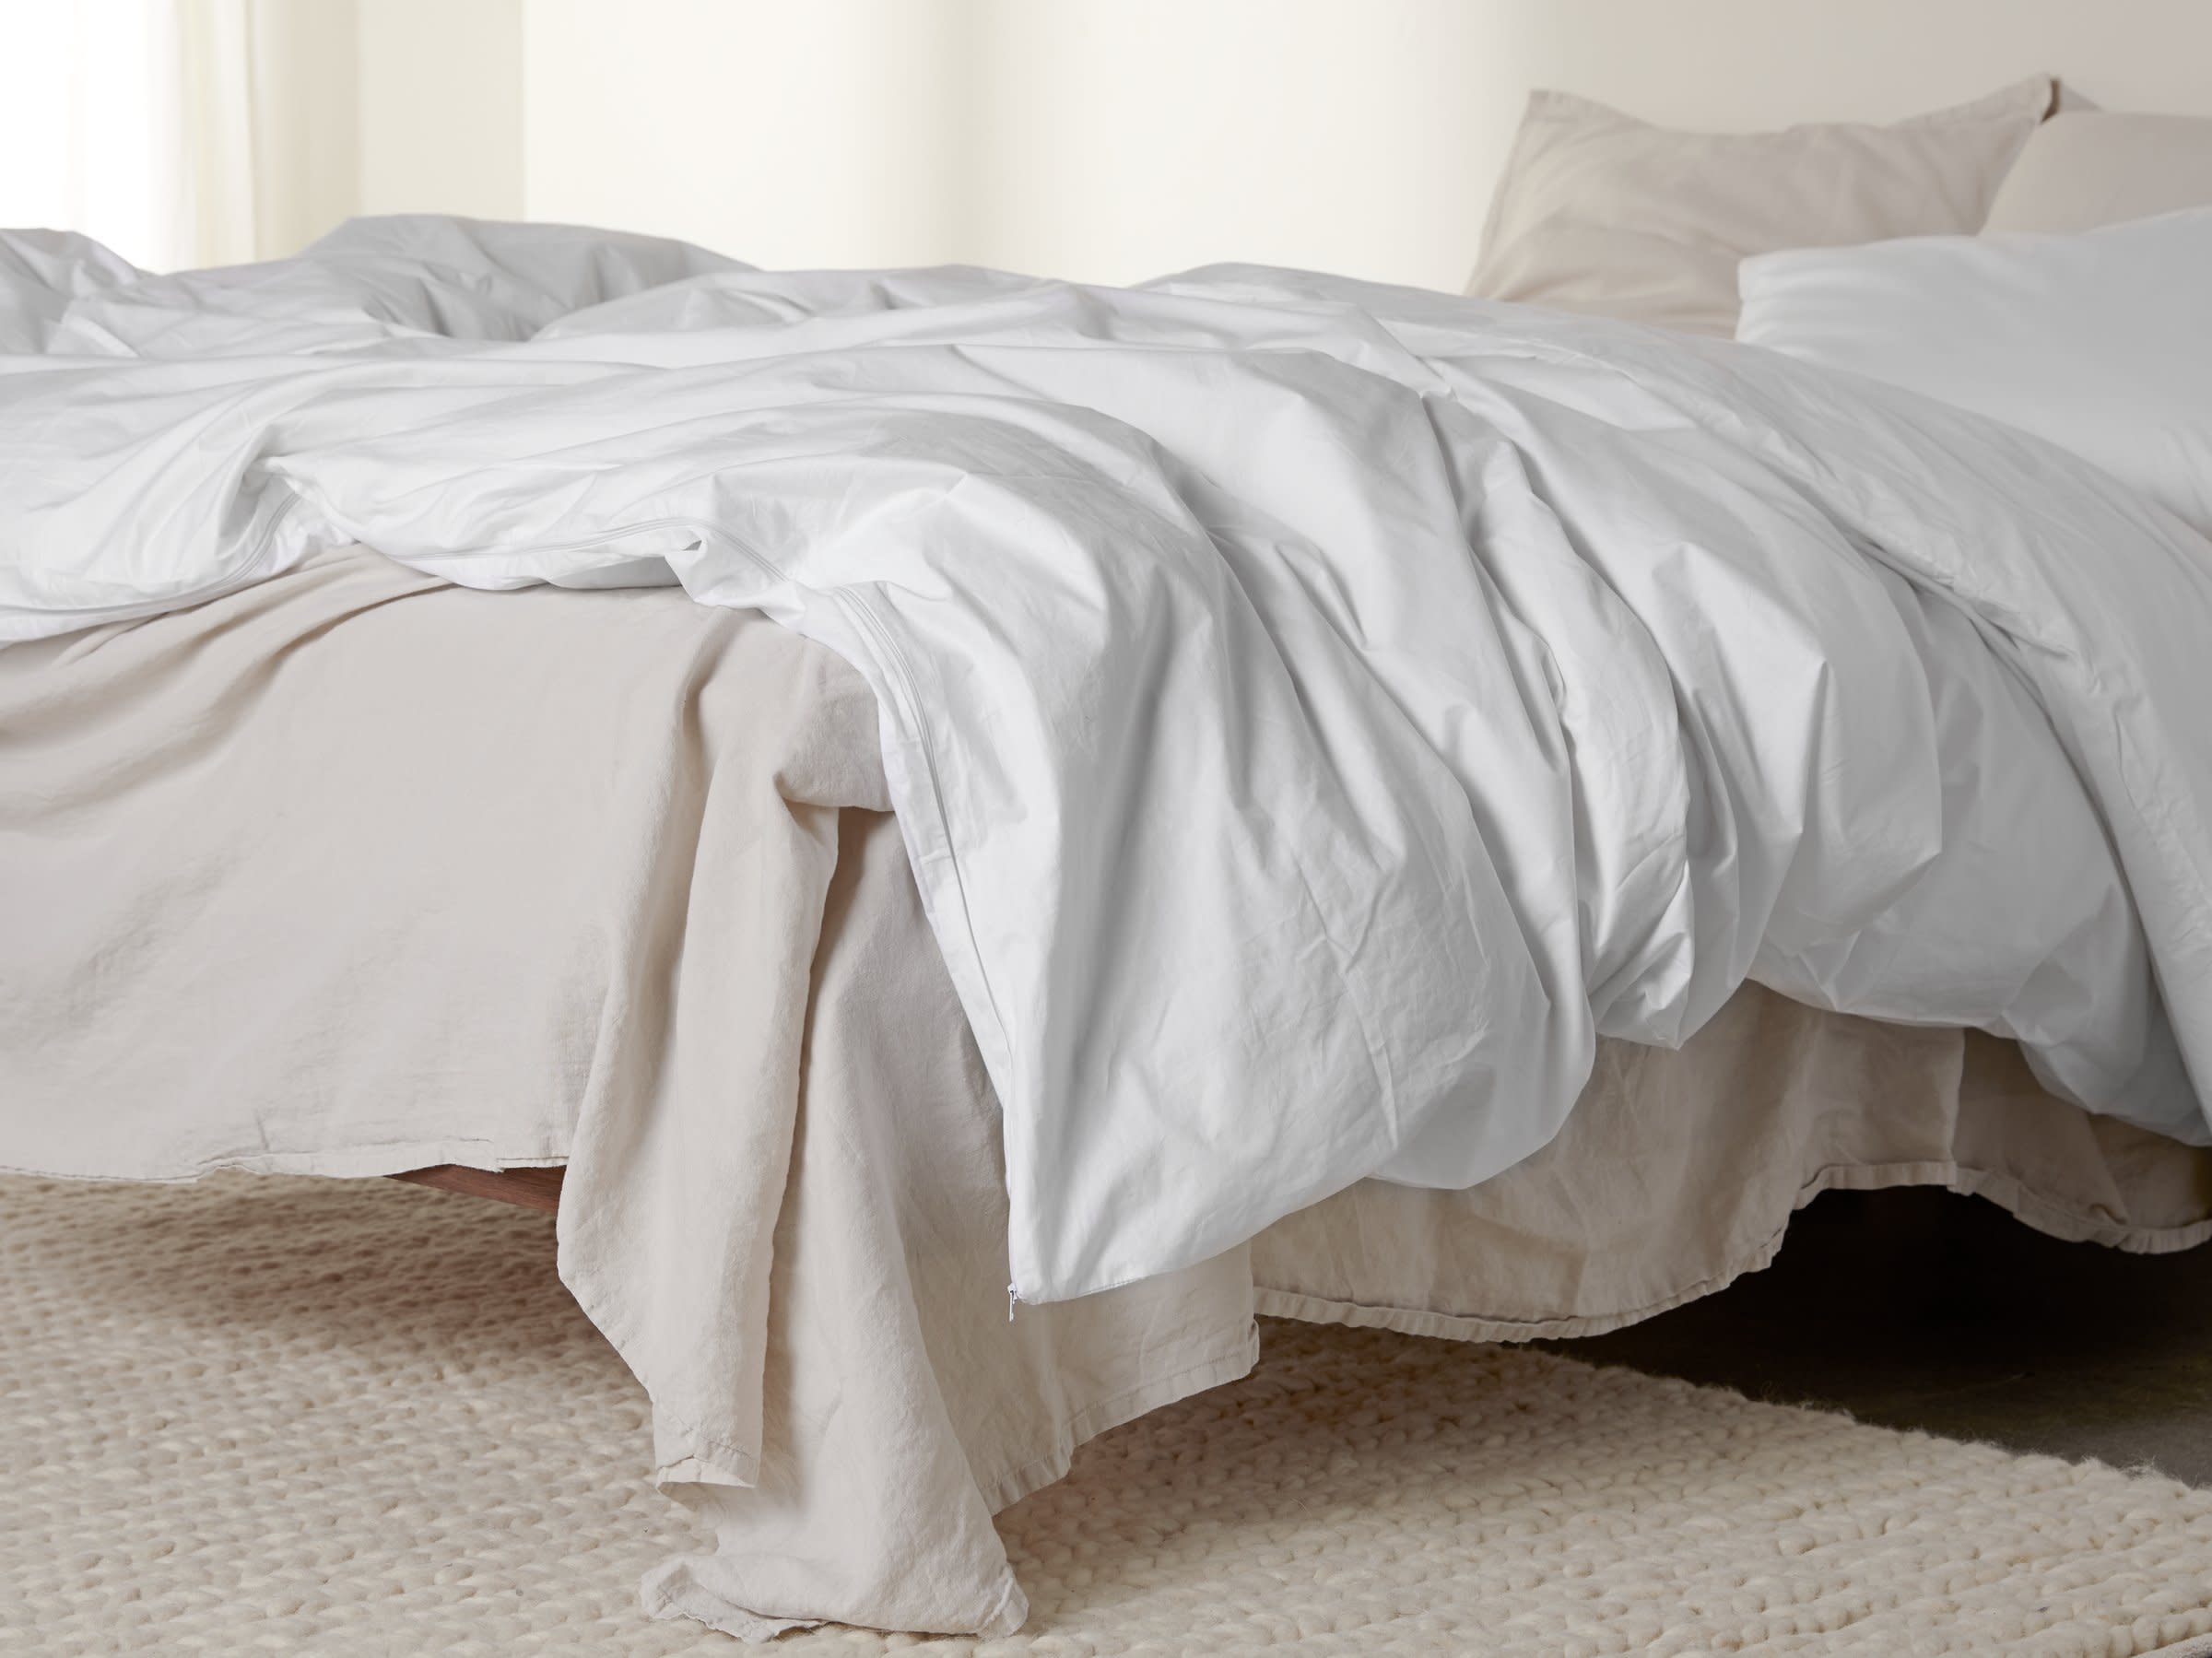 Cotton Duvet Protector Shown In A Room